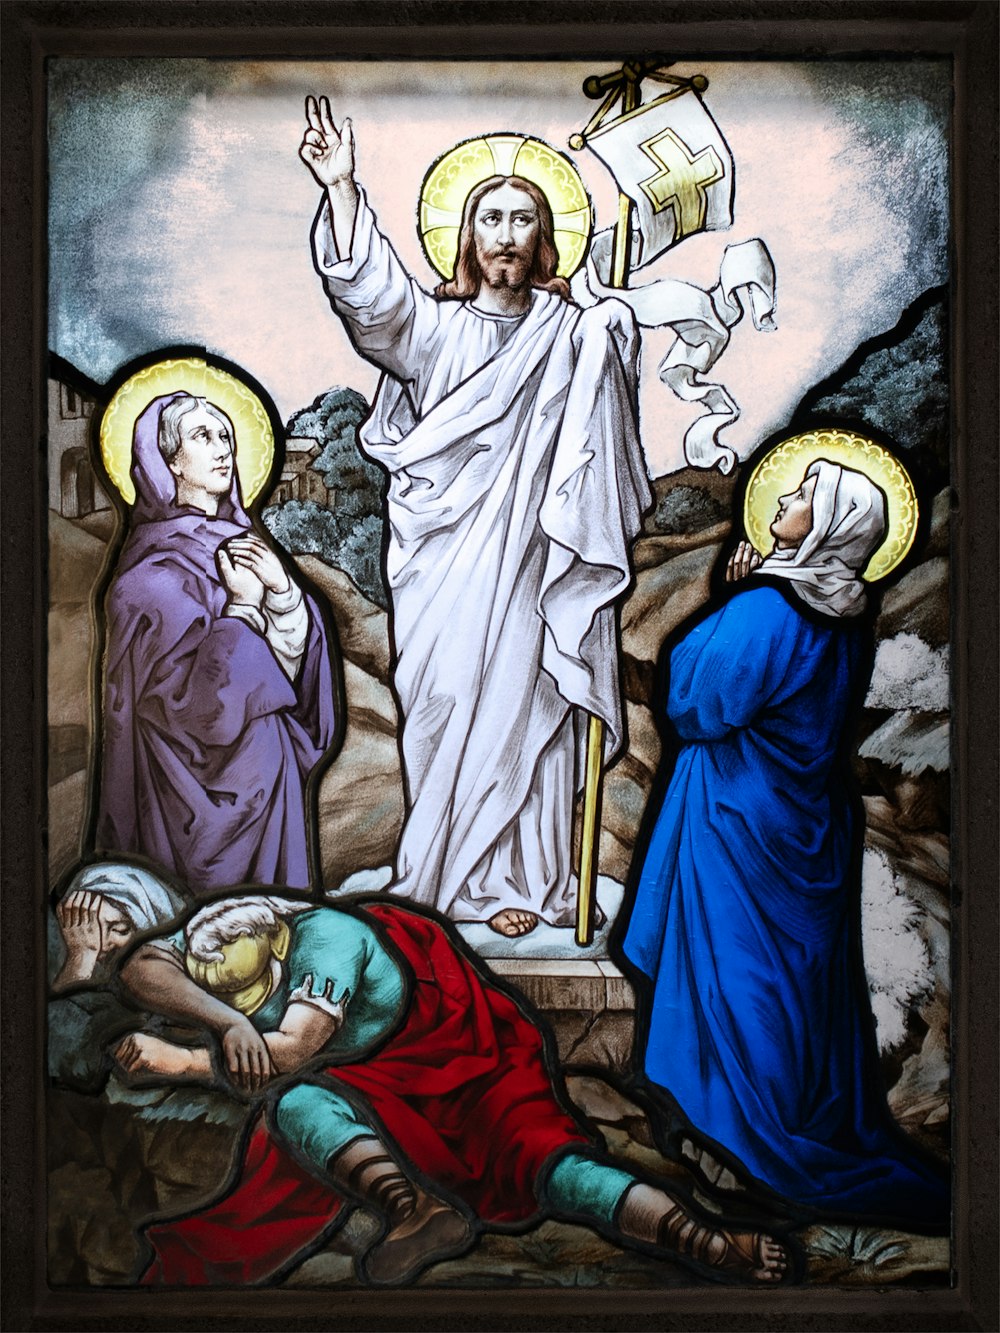 a stained glass window depicting jesus and other people